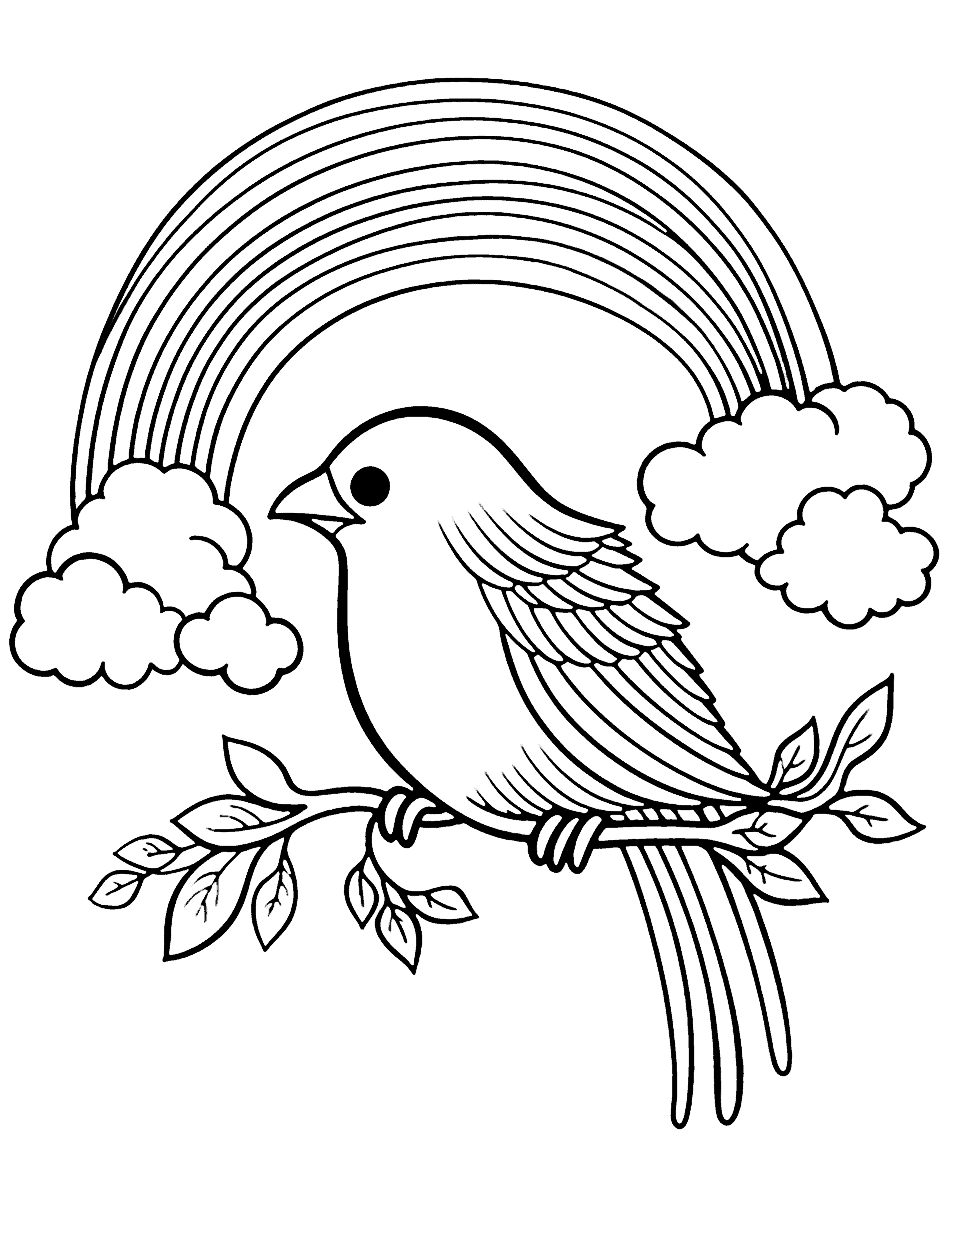 Rainbow Bird Coloring Page - A bird with rainbow-colored feathers perched on a branch.